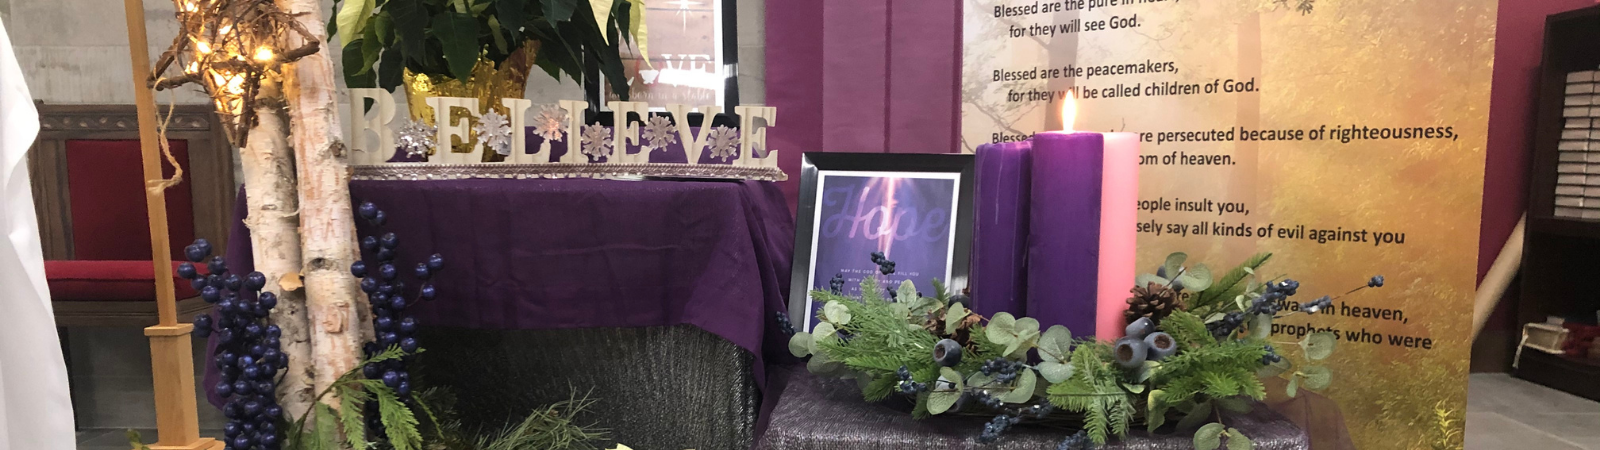 Advent Display featuring: candles, star, grapes, flowers